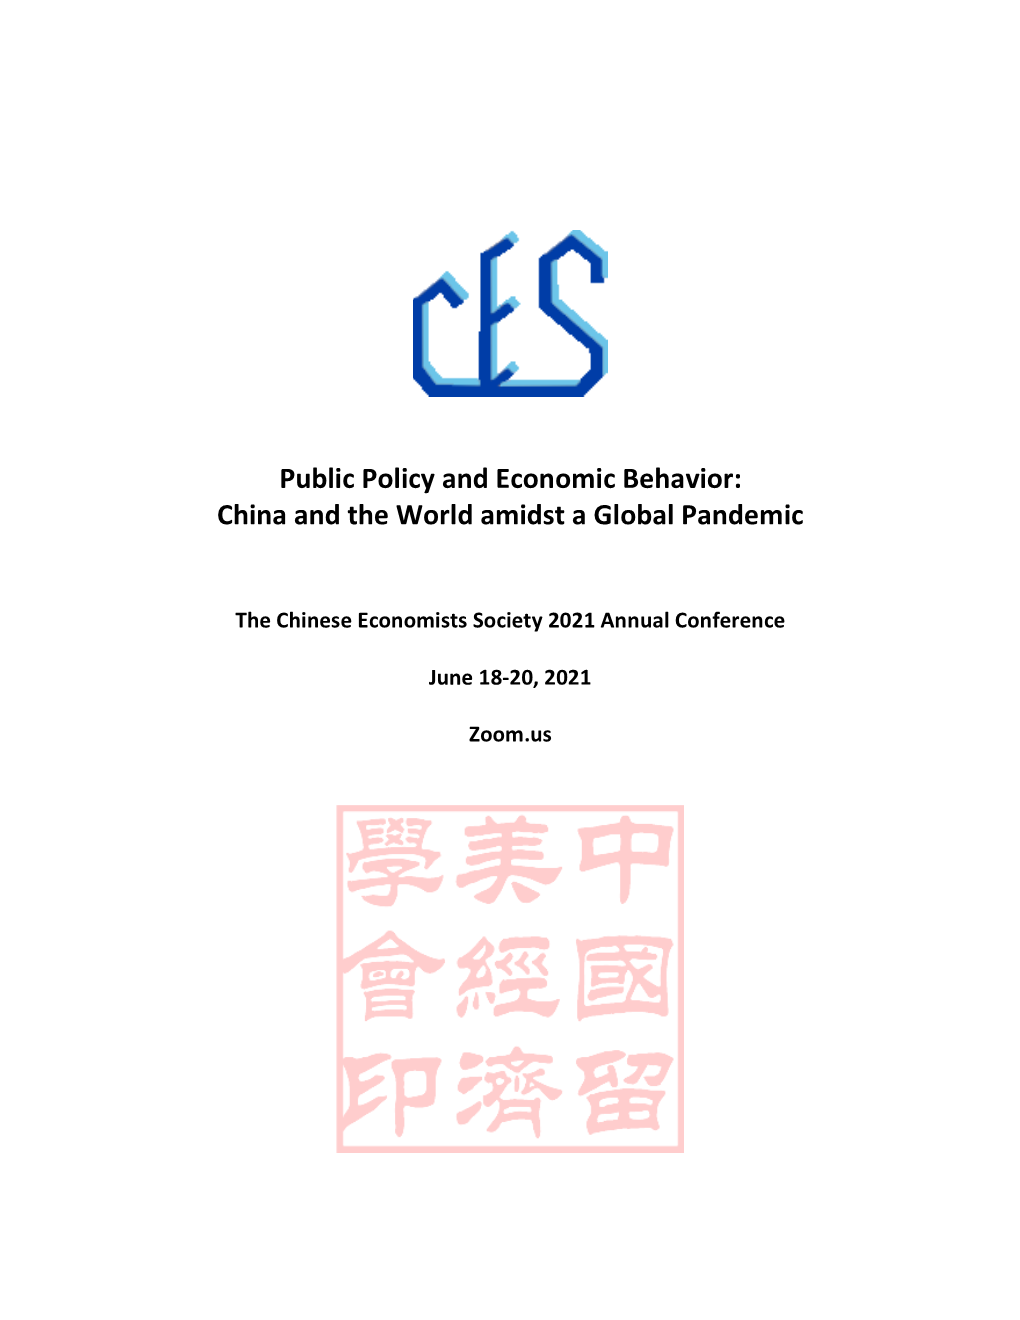 Public Policy and Economic Behavior: China and the World Amidst a Global Pandemic